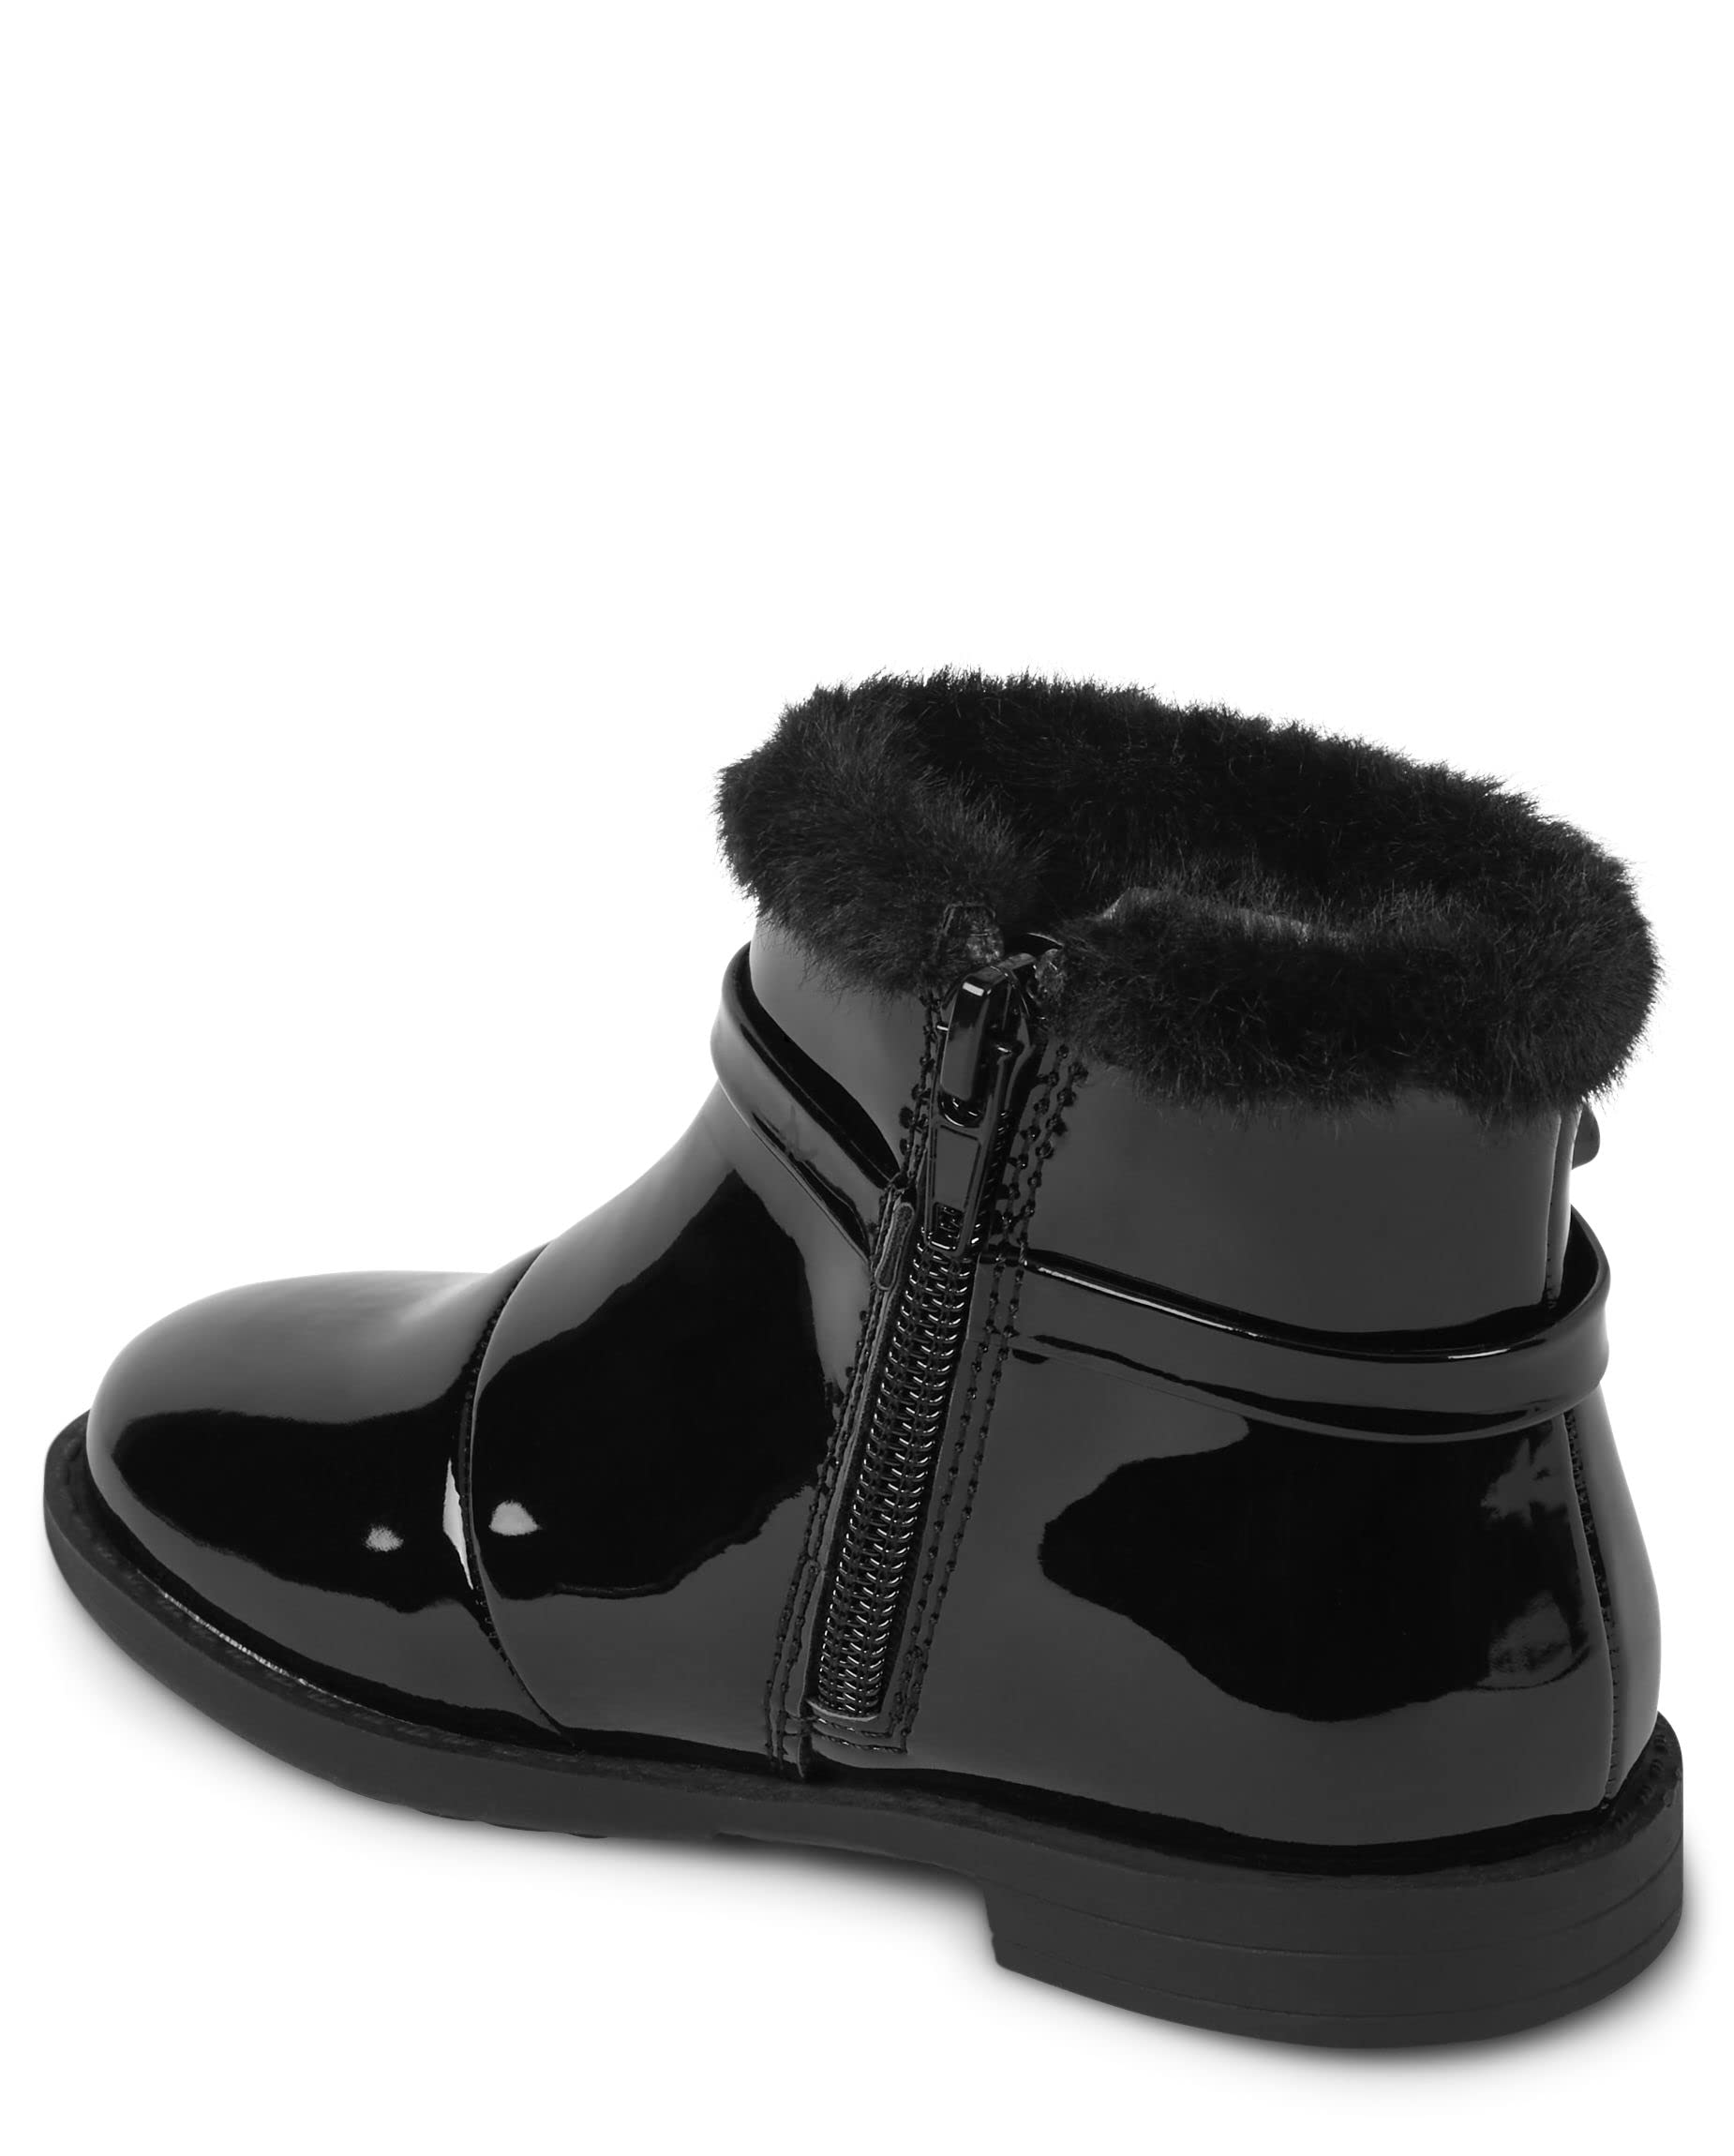 Gymboree Unisex-Child and Toddler Faux Leather Booties Ankle Boot